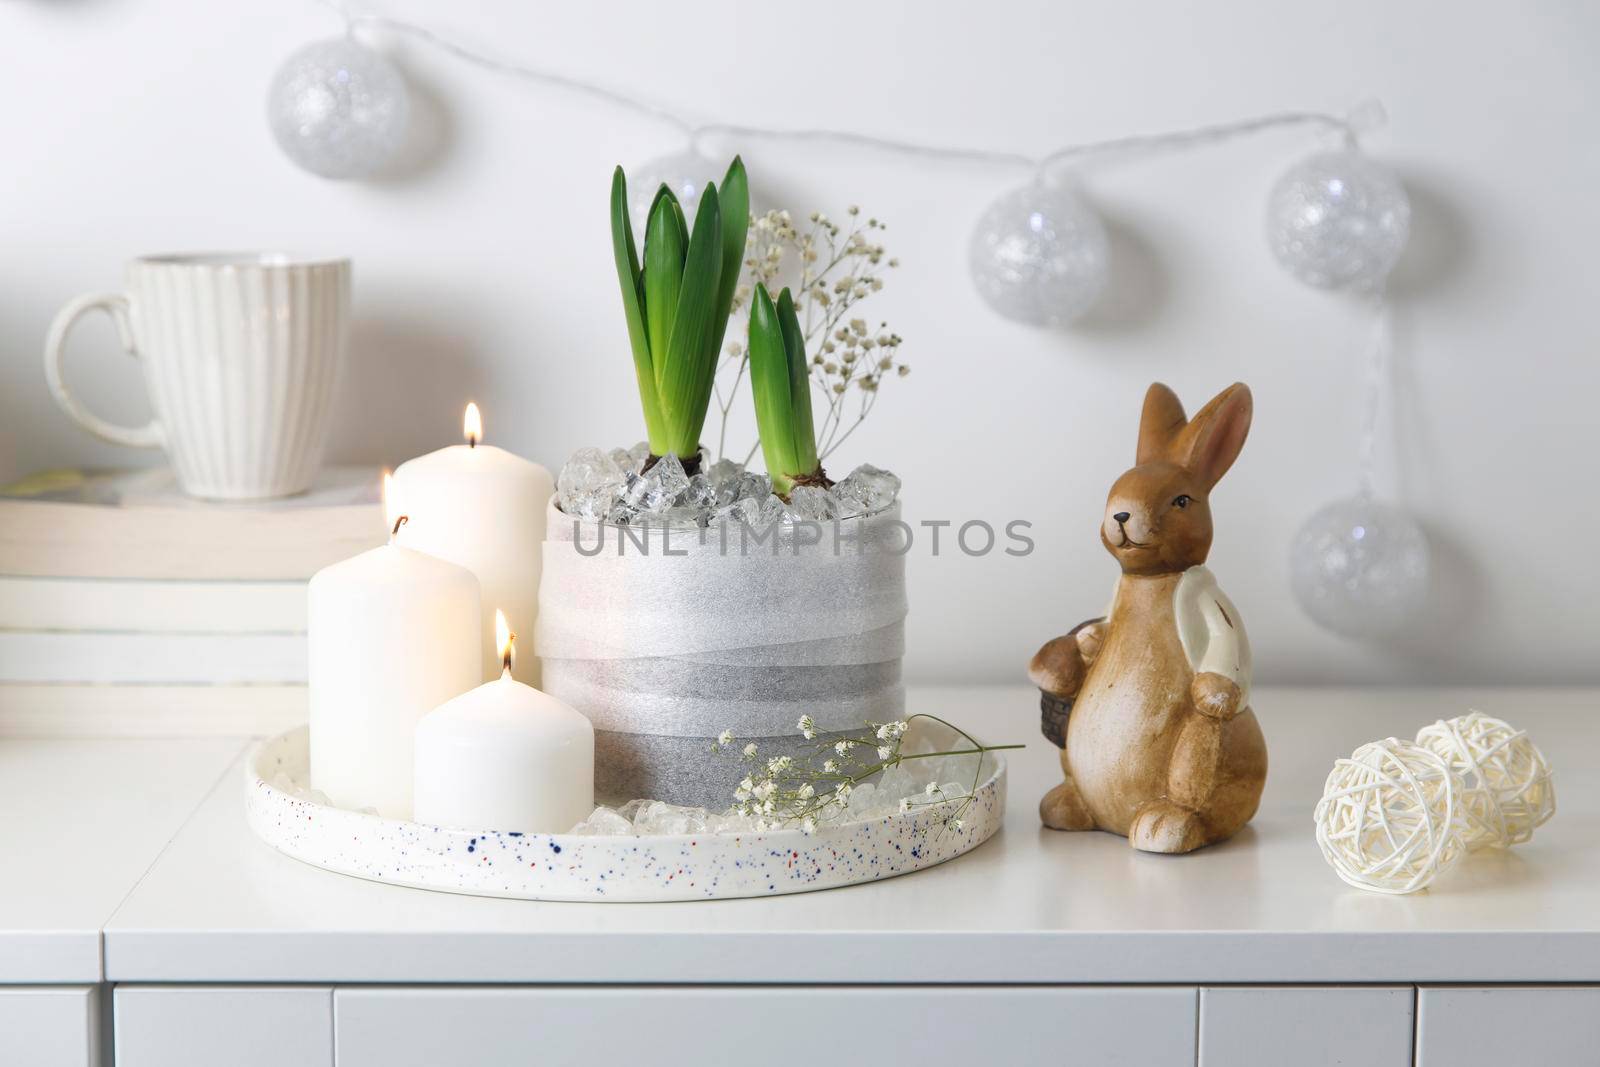 Unblown hyacinths with burning candles on a tray, a stack of books, a mug of tea, a garland of thread on the wall. Easter room decoration.